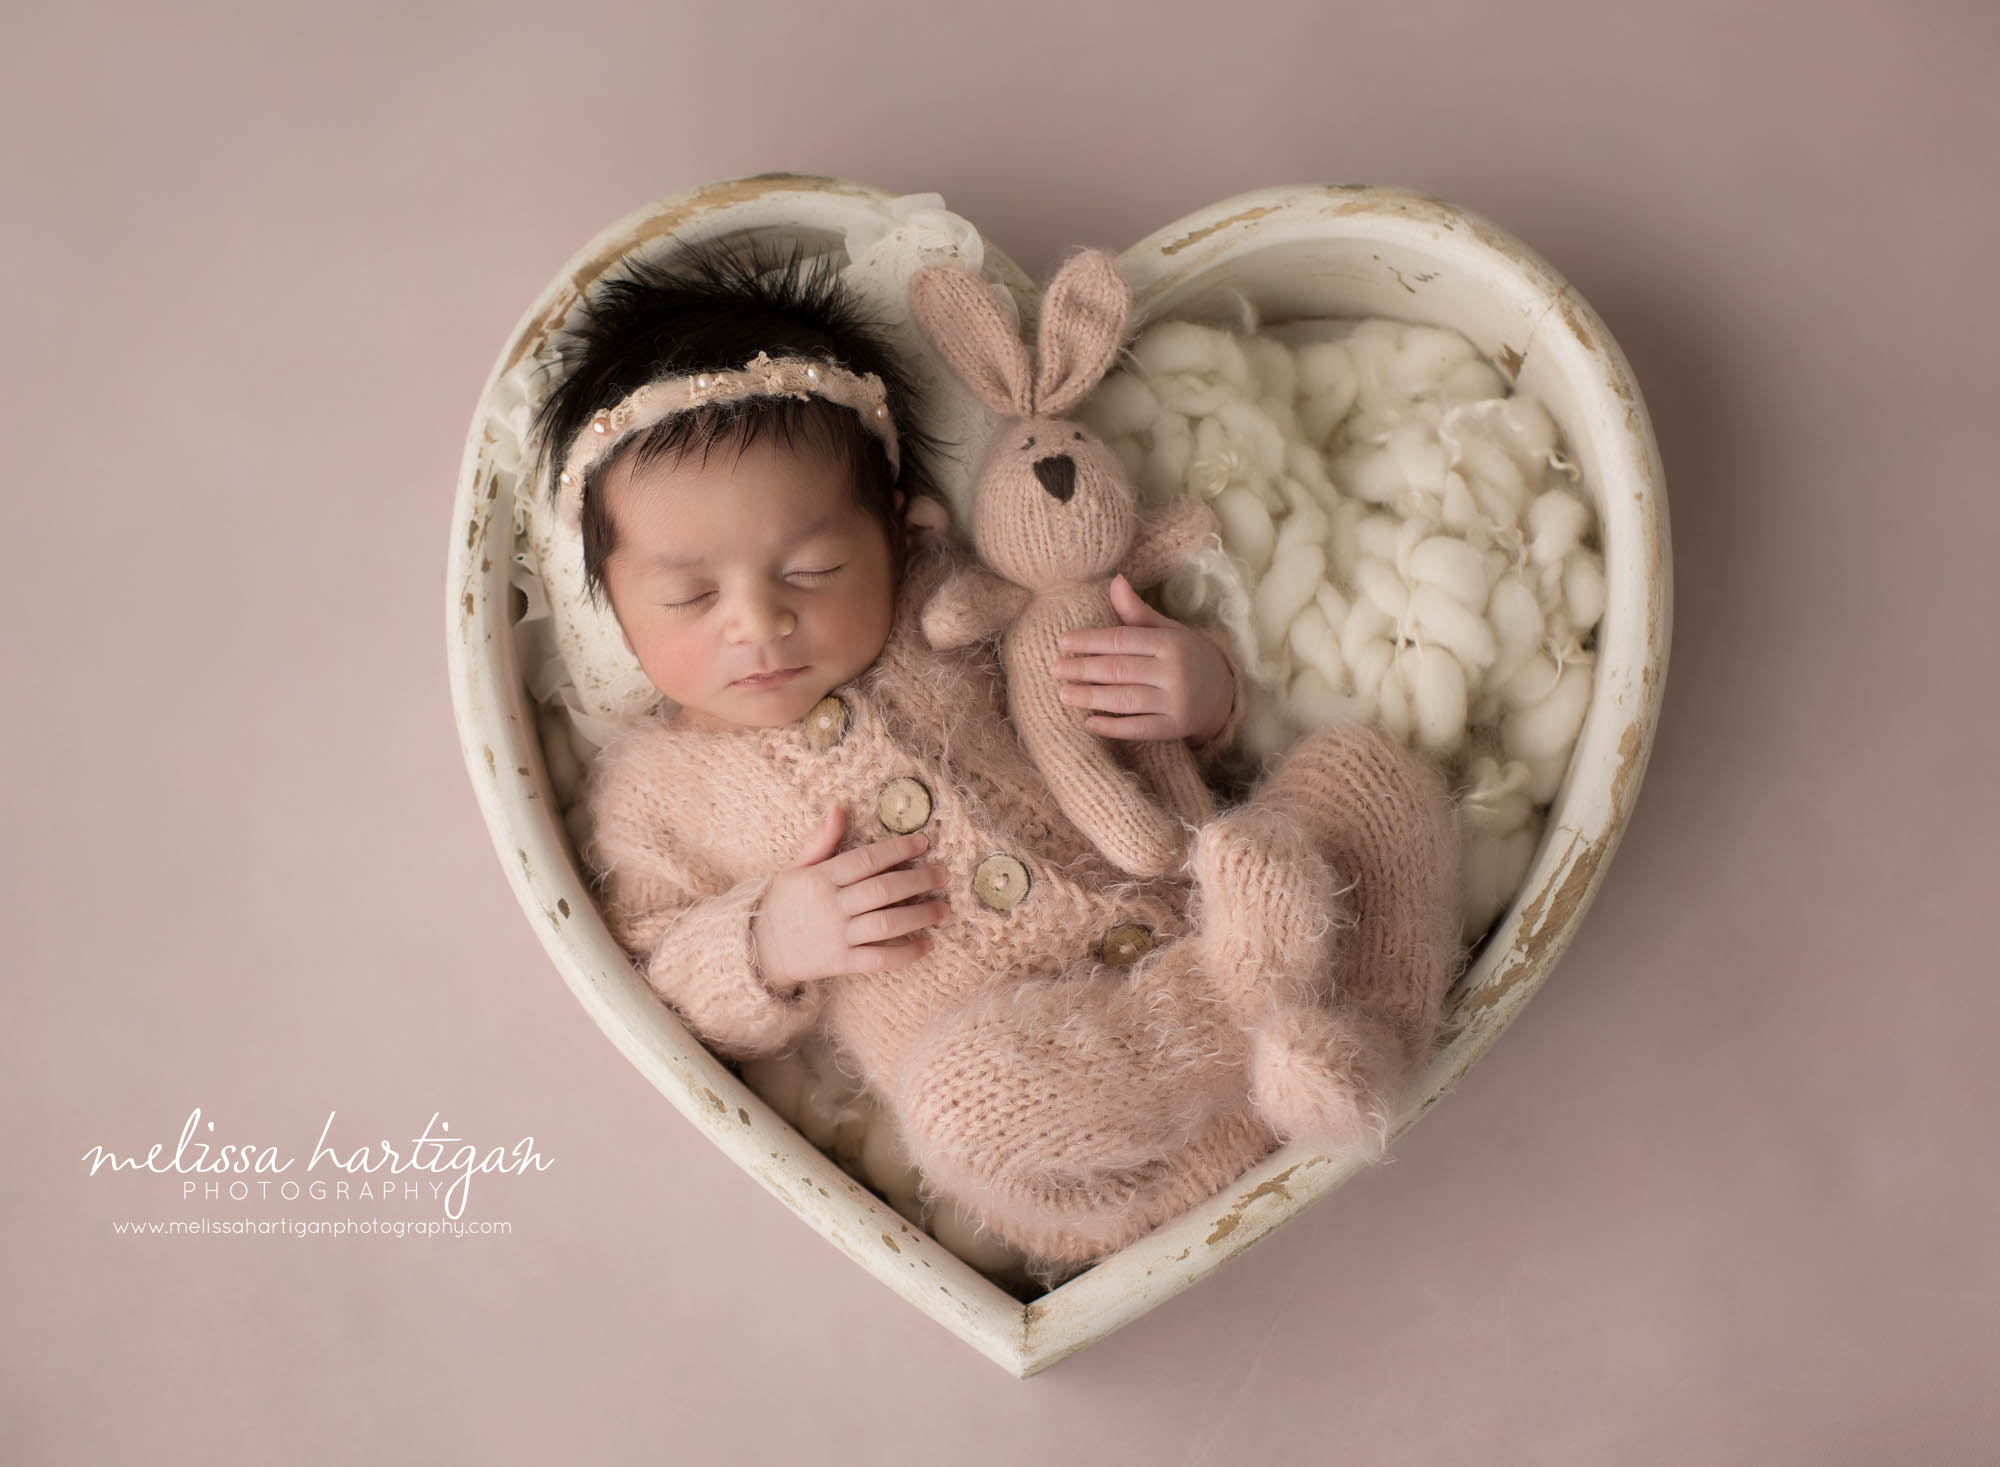 newborn baby girl wearing pink knitted outfit holding pink bunny prop wearing pink headband posed in cream wooden heart prop